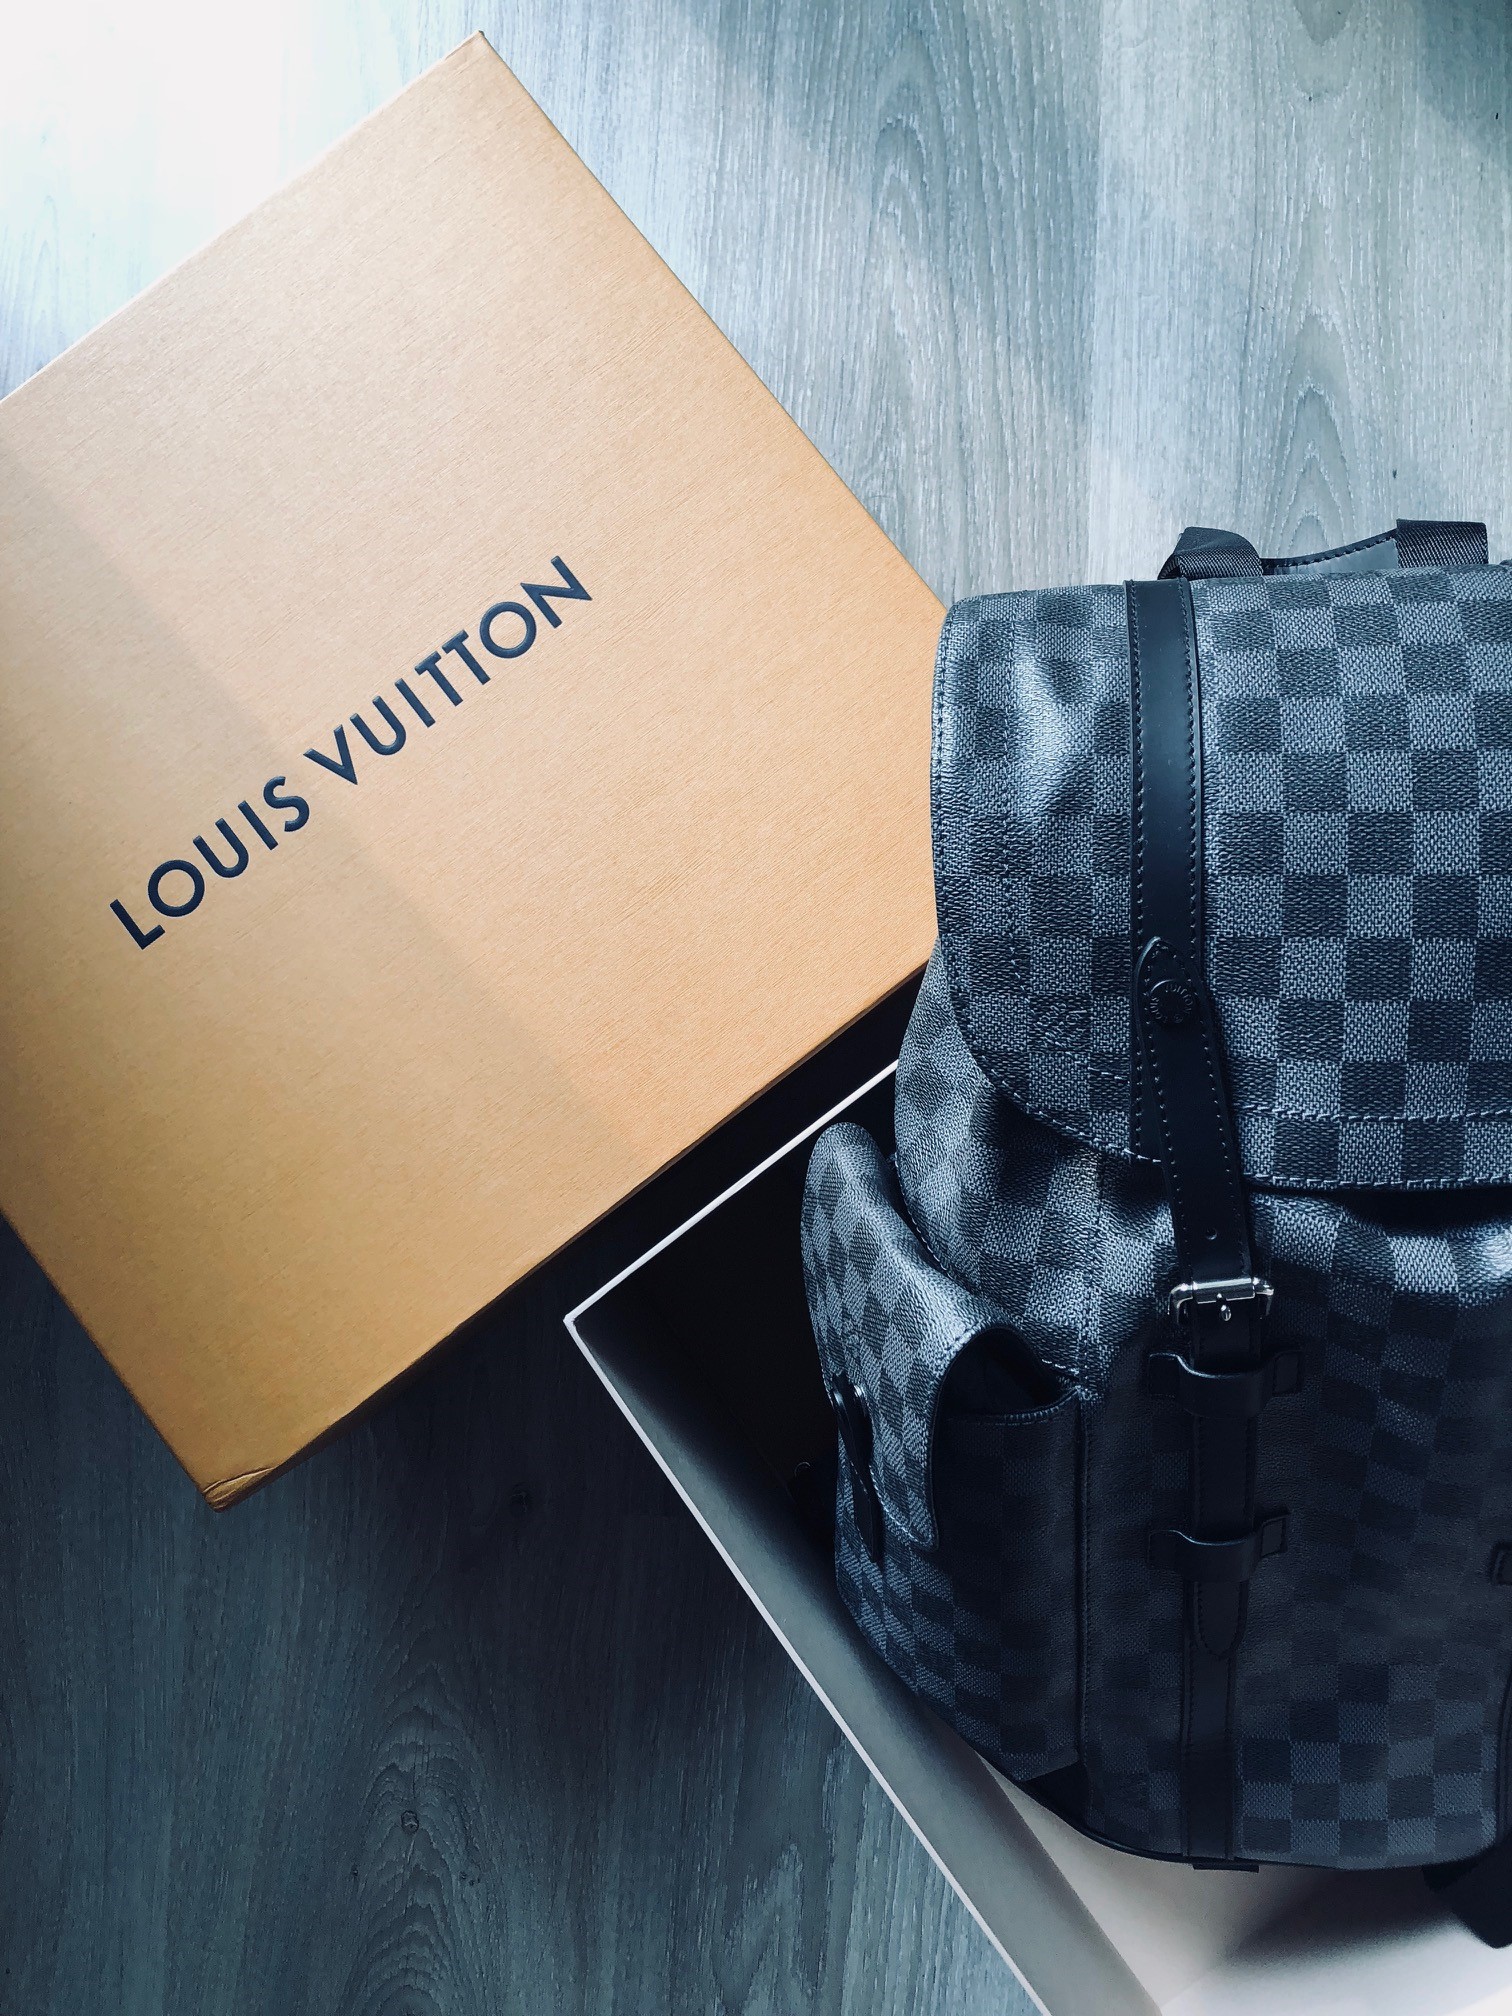 Louis Vuitton introduces LV Signature sunglasses - Fucking Young!